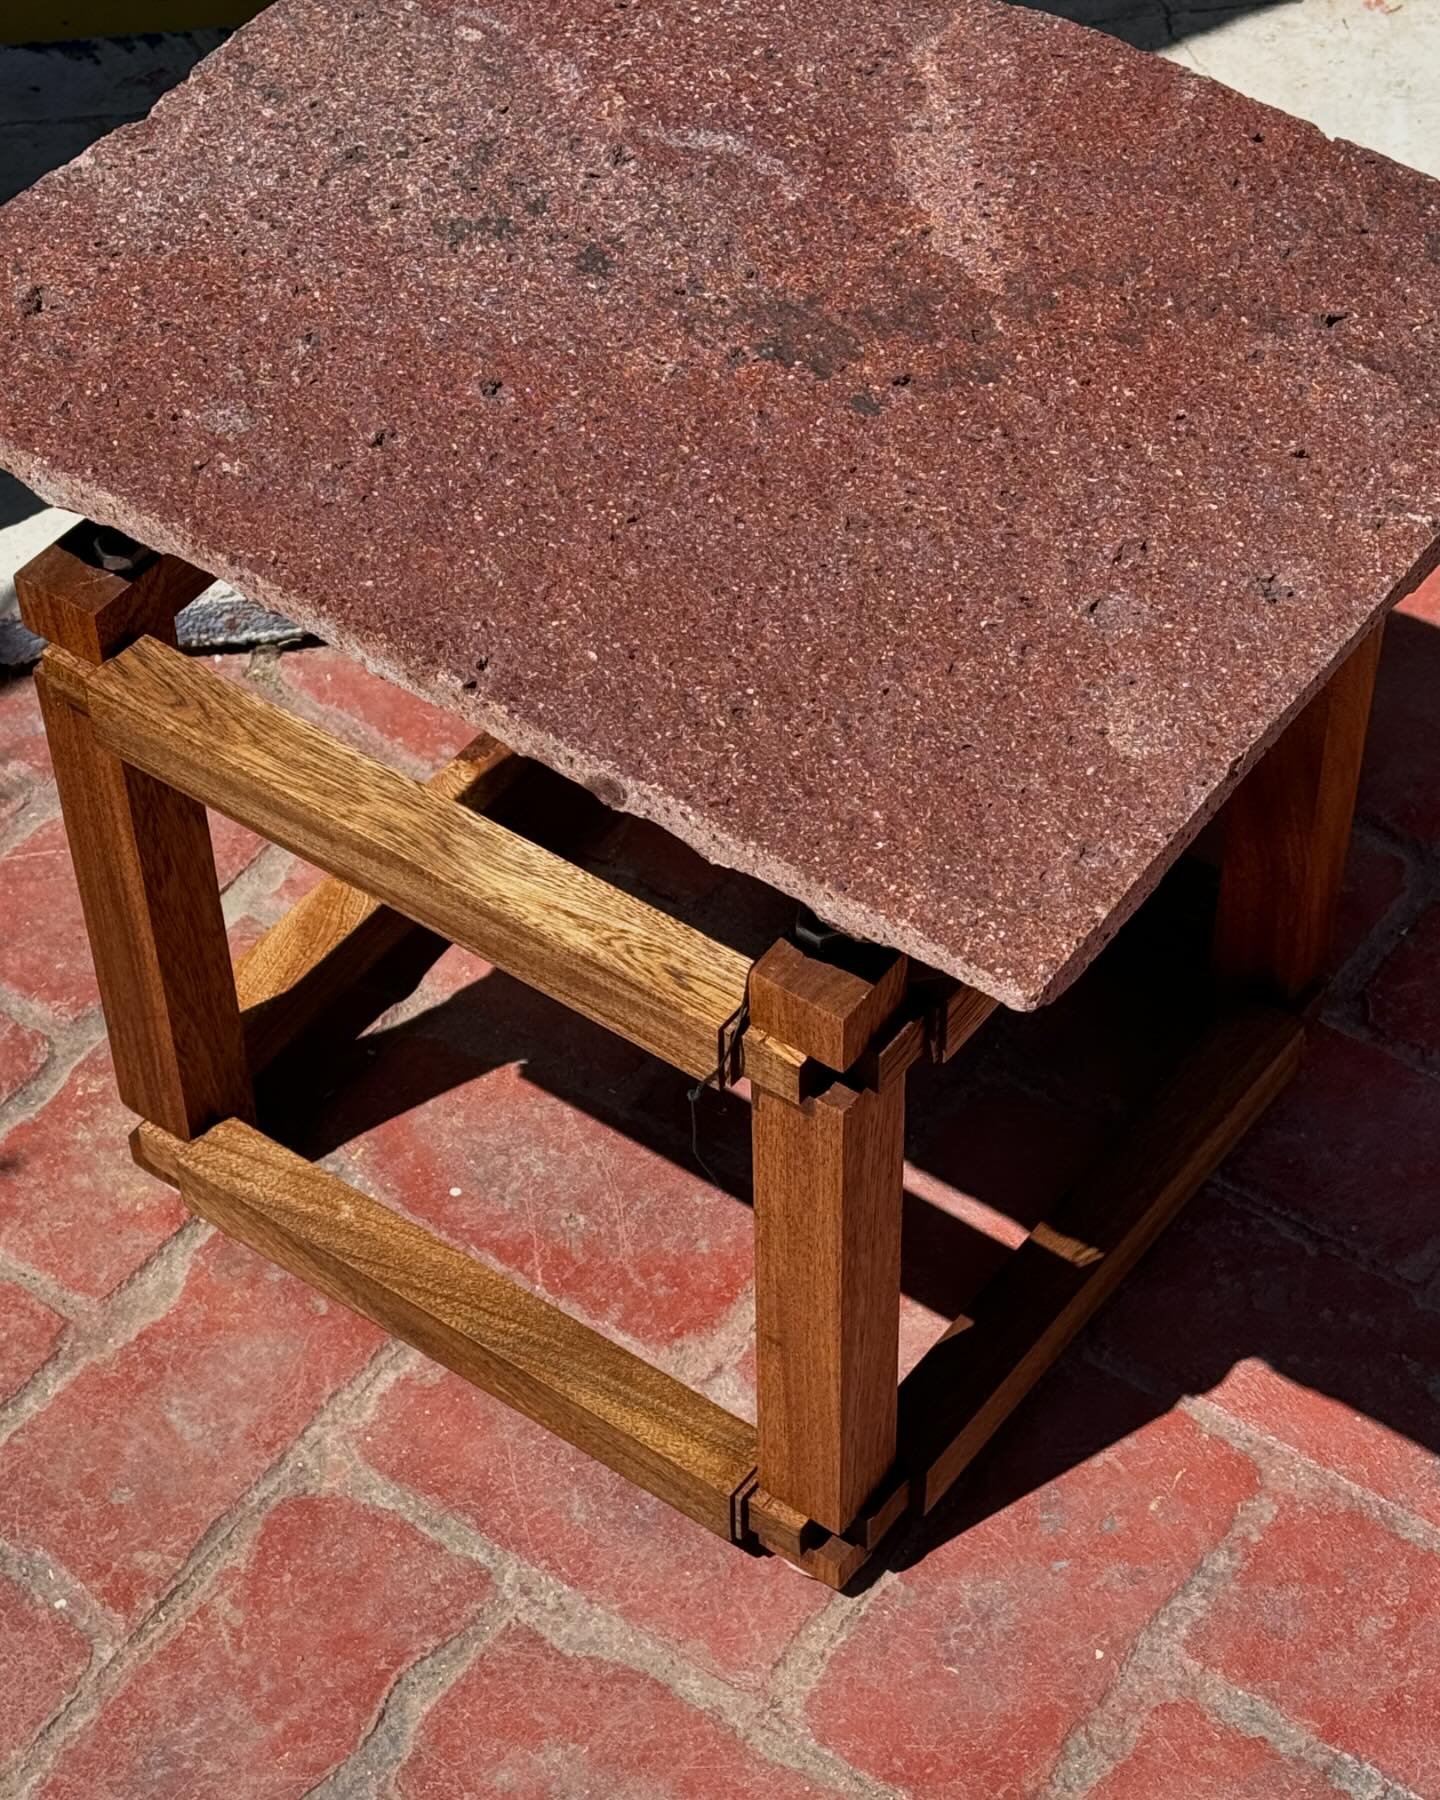 One of our new favorites, a side table of all found objects. And while the rosa morada is leftover from other pieces in the workshop, and the stone was found at one of our favorite La Paz hideaways, the ingenuity to create a beautiful and sturdy tabl